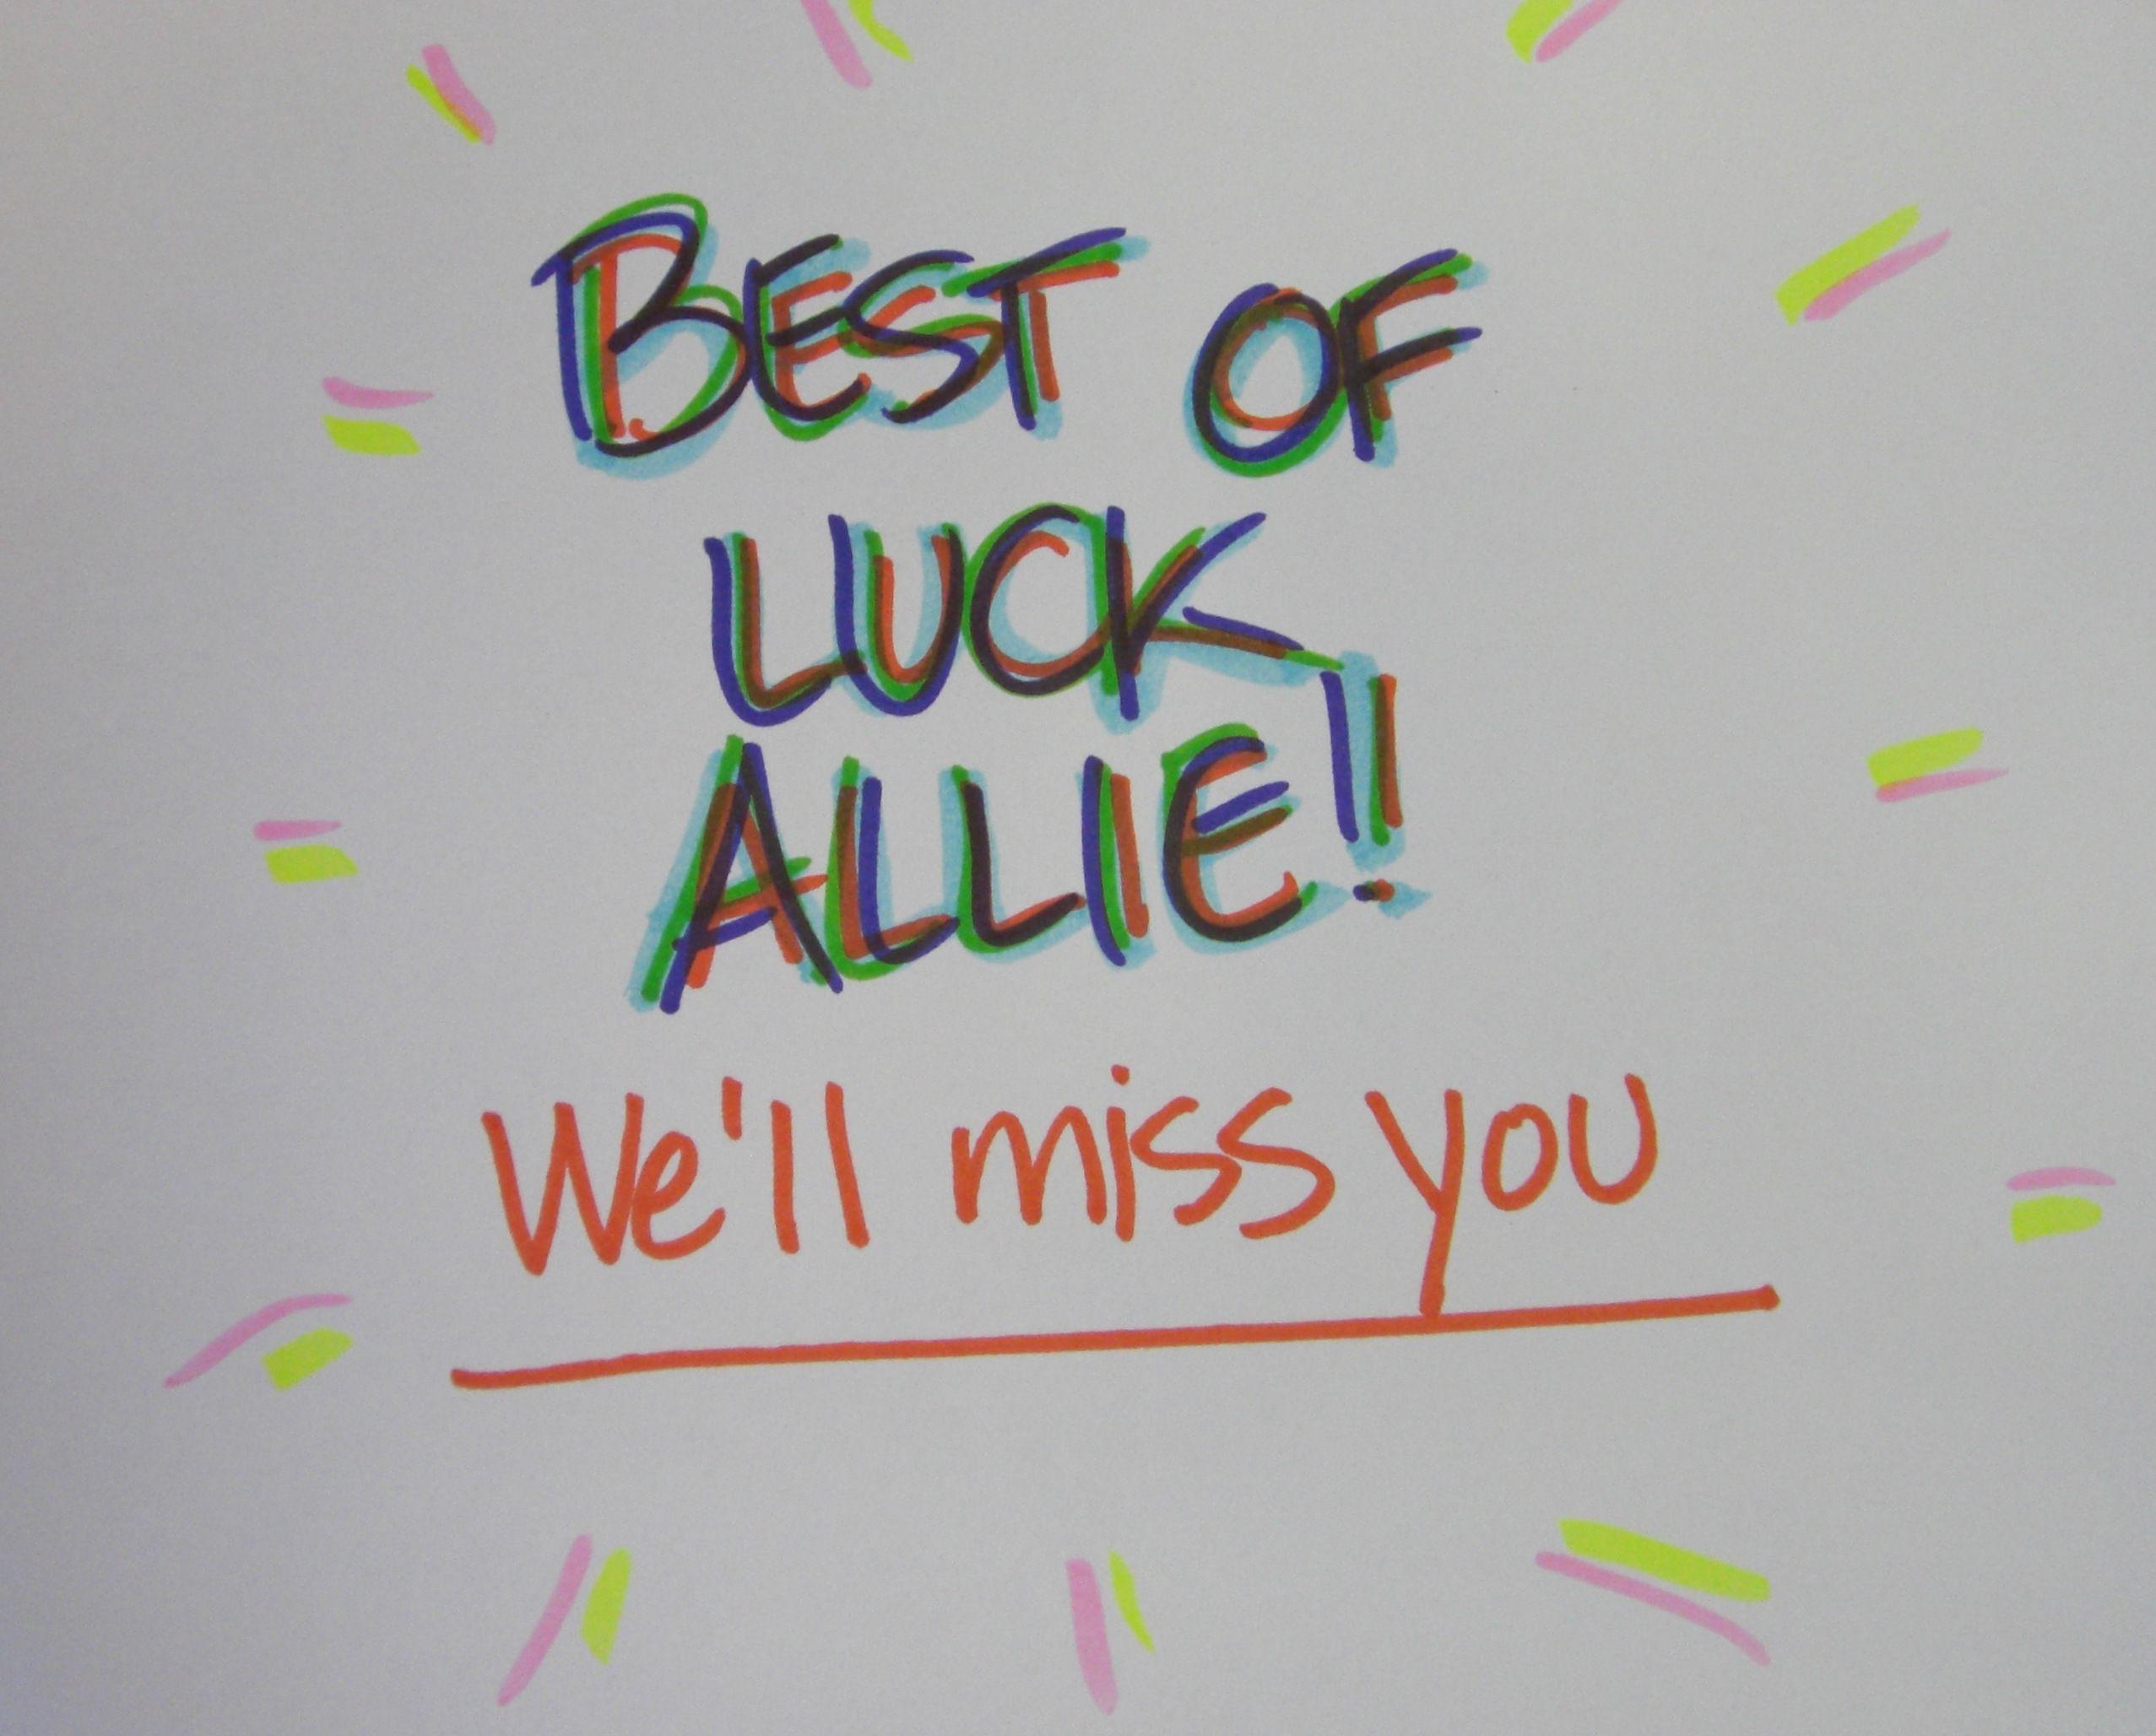 To Allie: Good Luck!